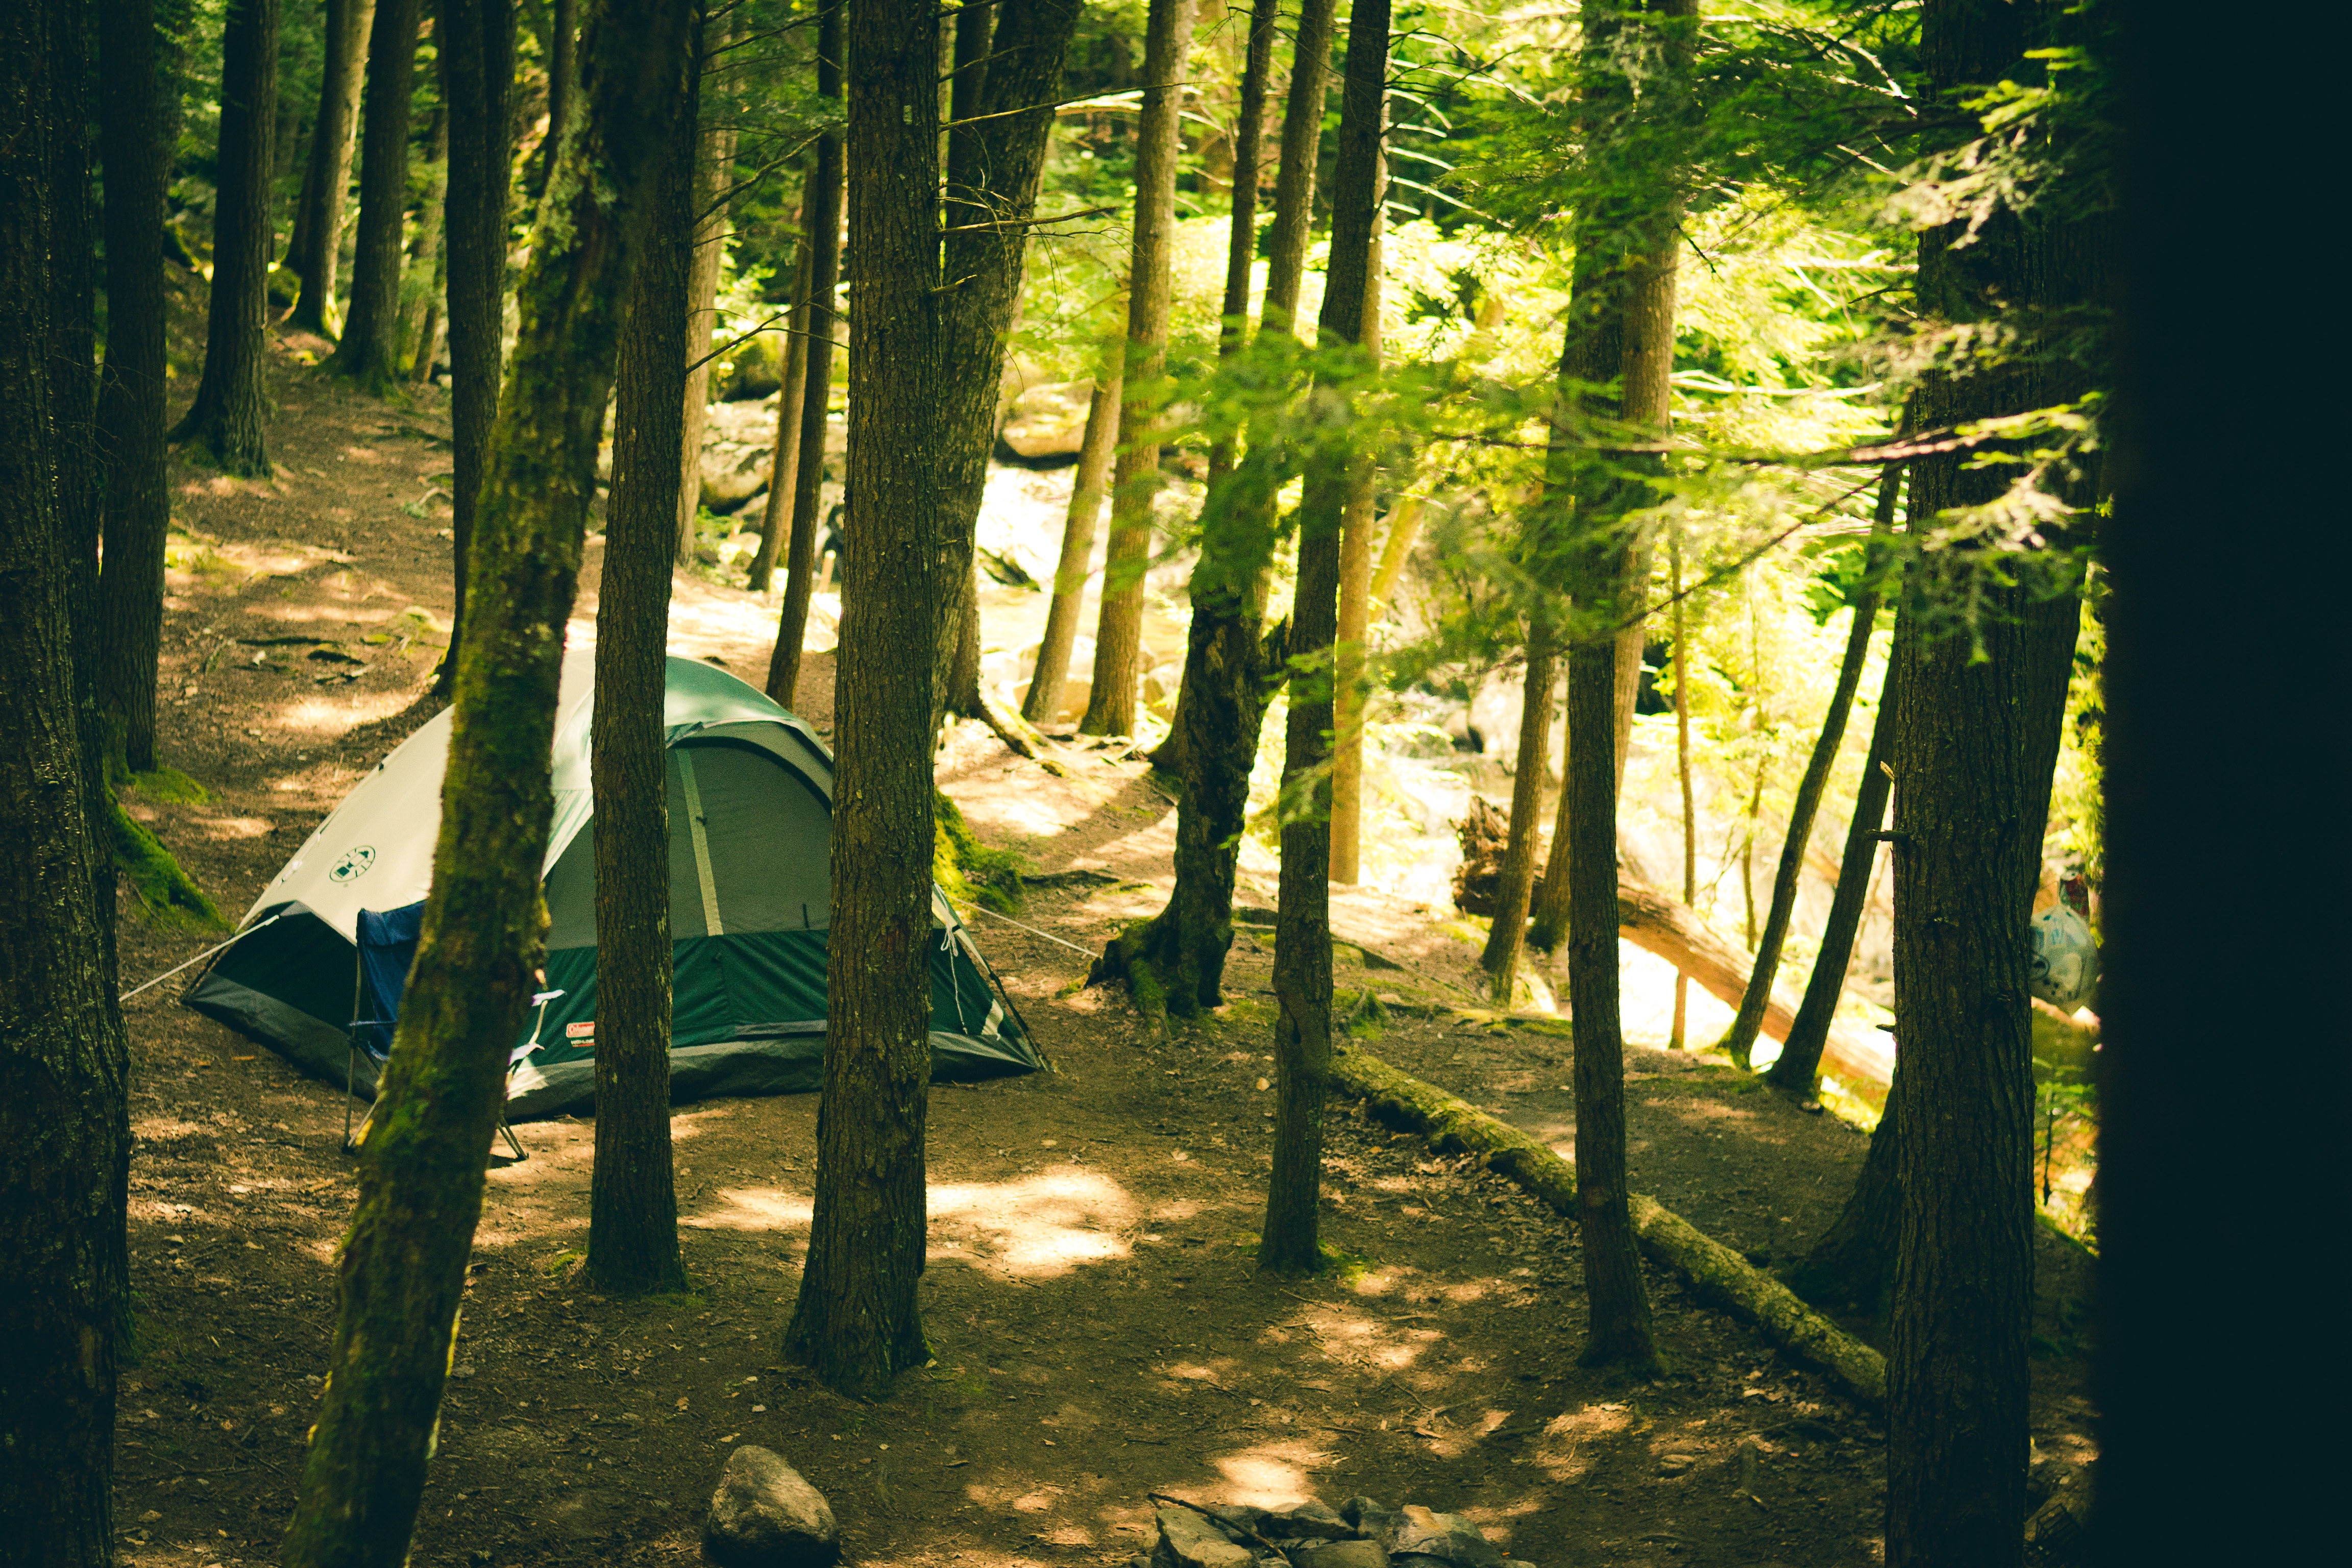 camping tent set up in the Adirondack wilderness